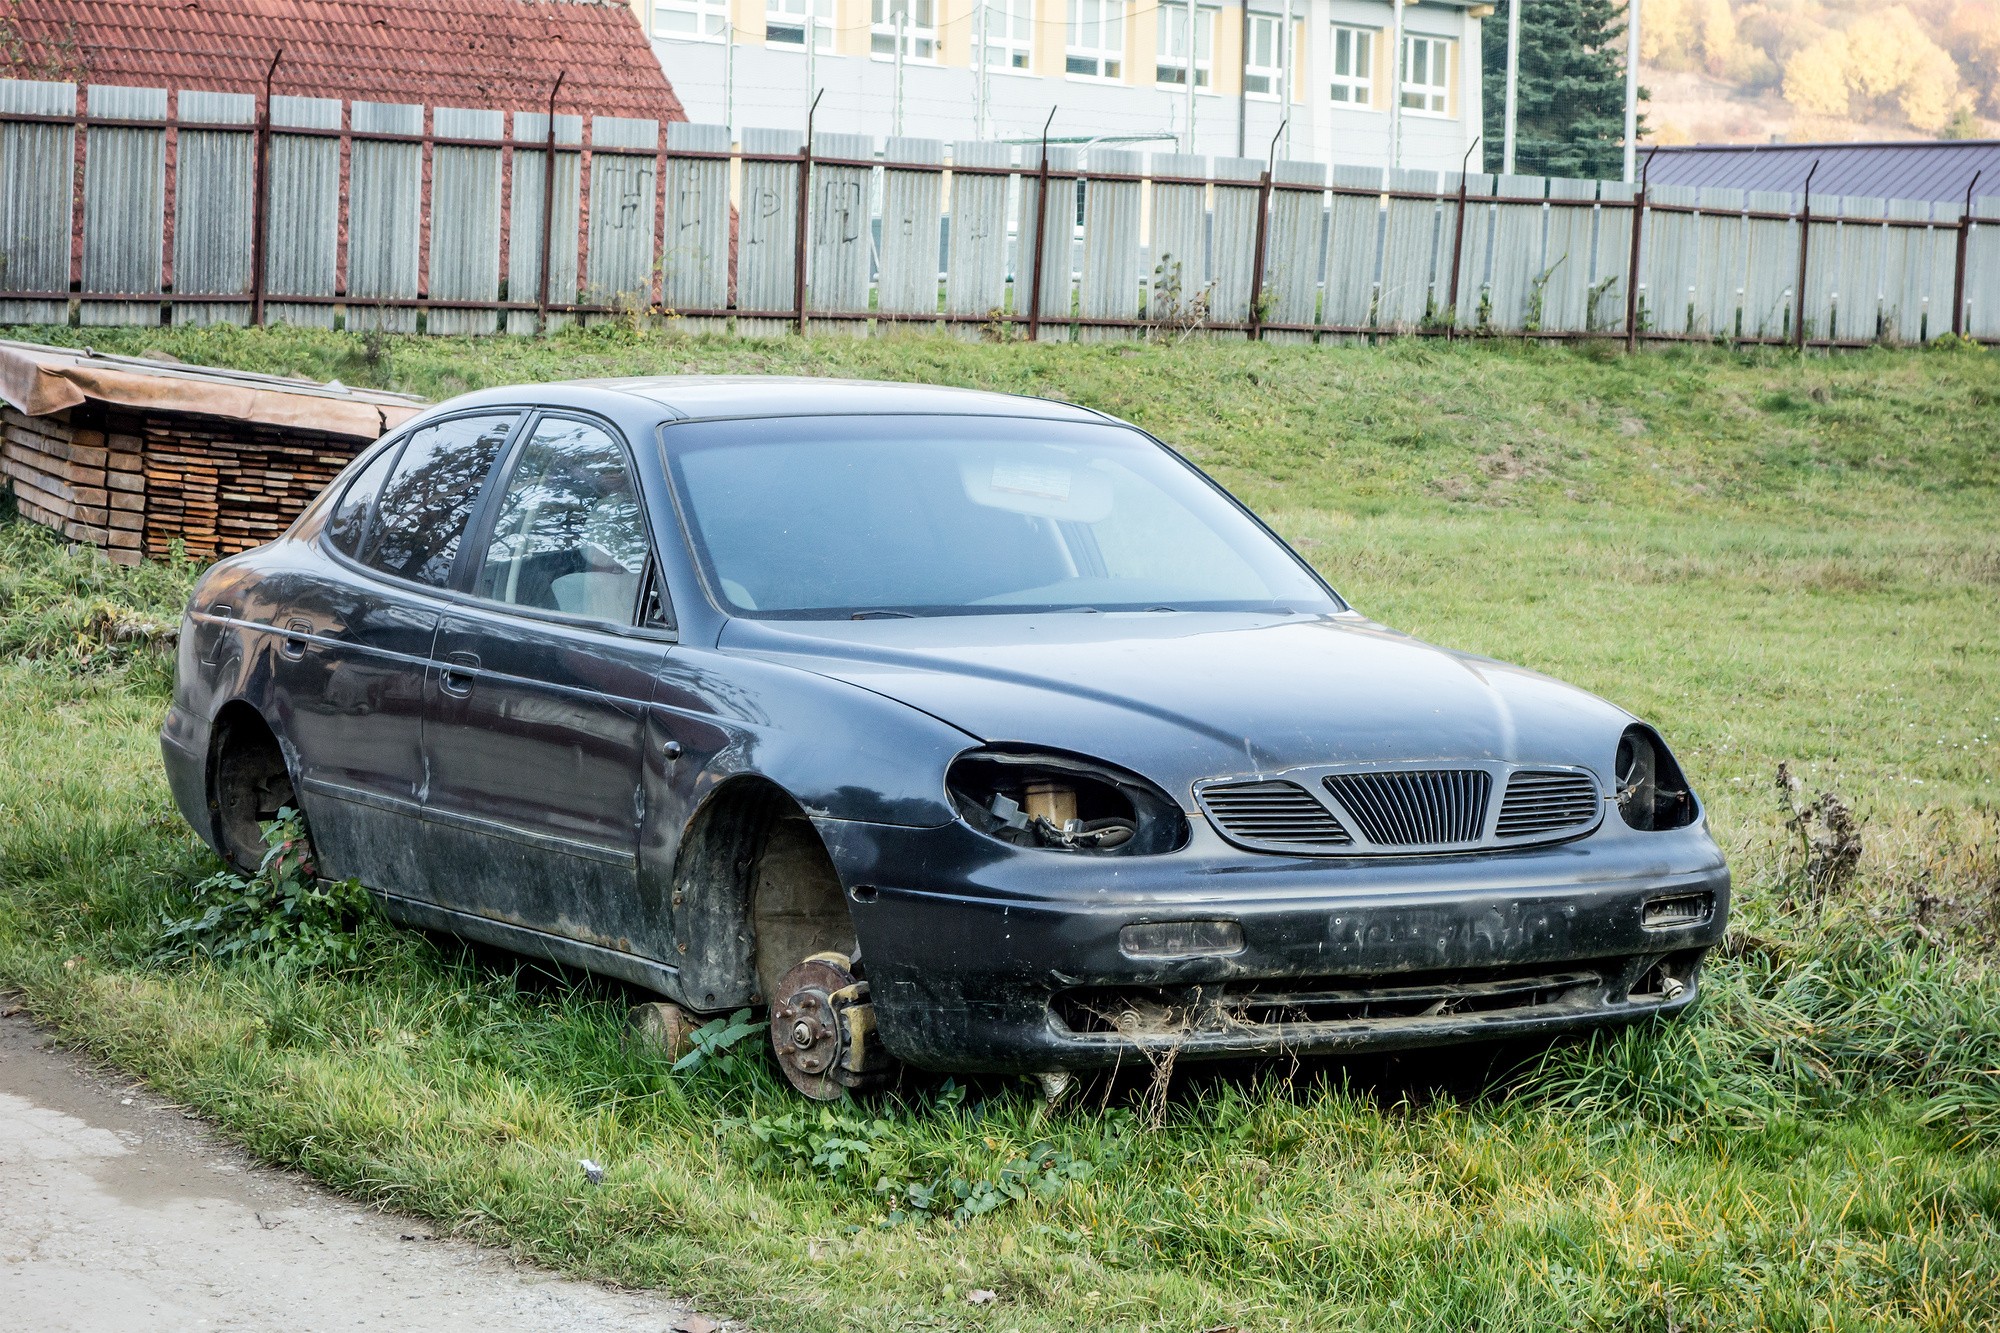 Junking for Joy: How To Sell Your Junk Car for Cash